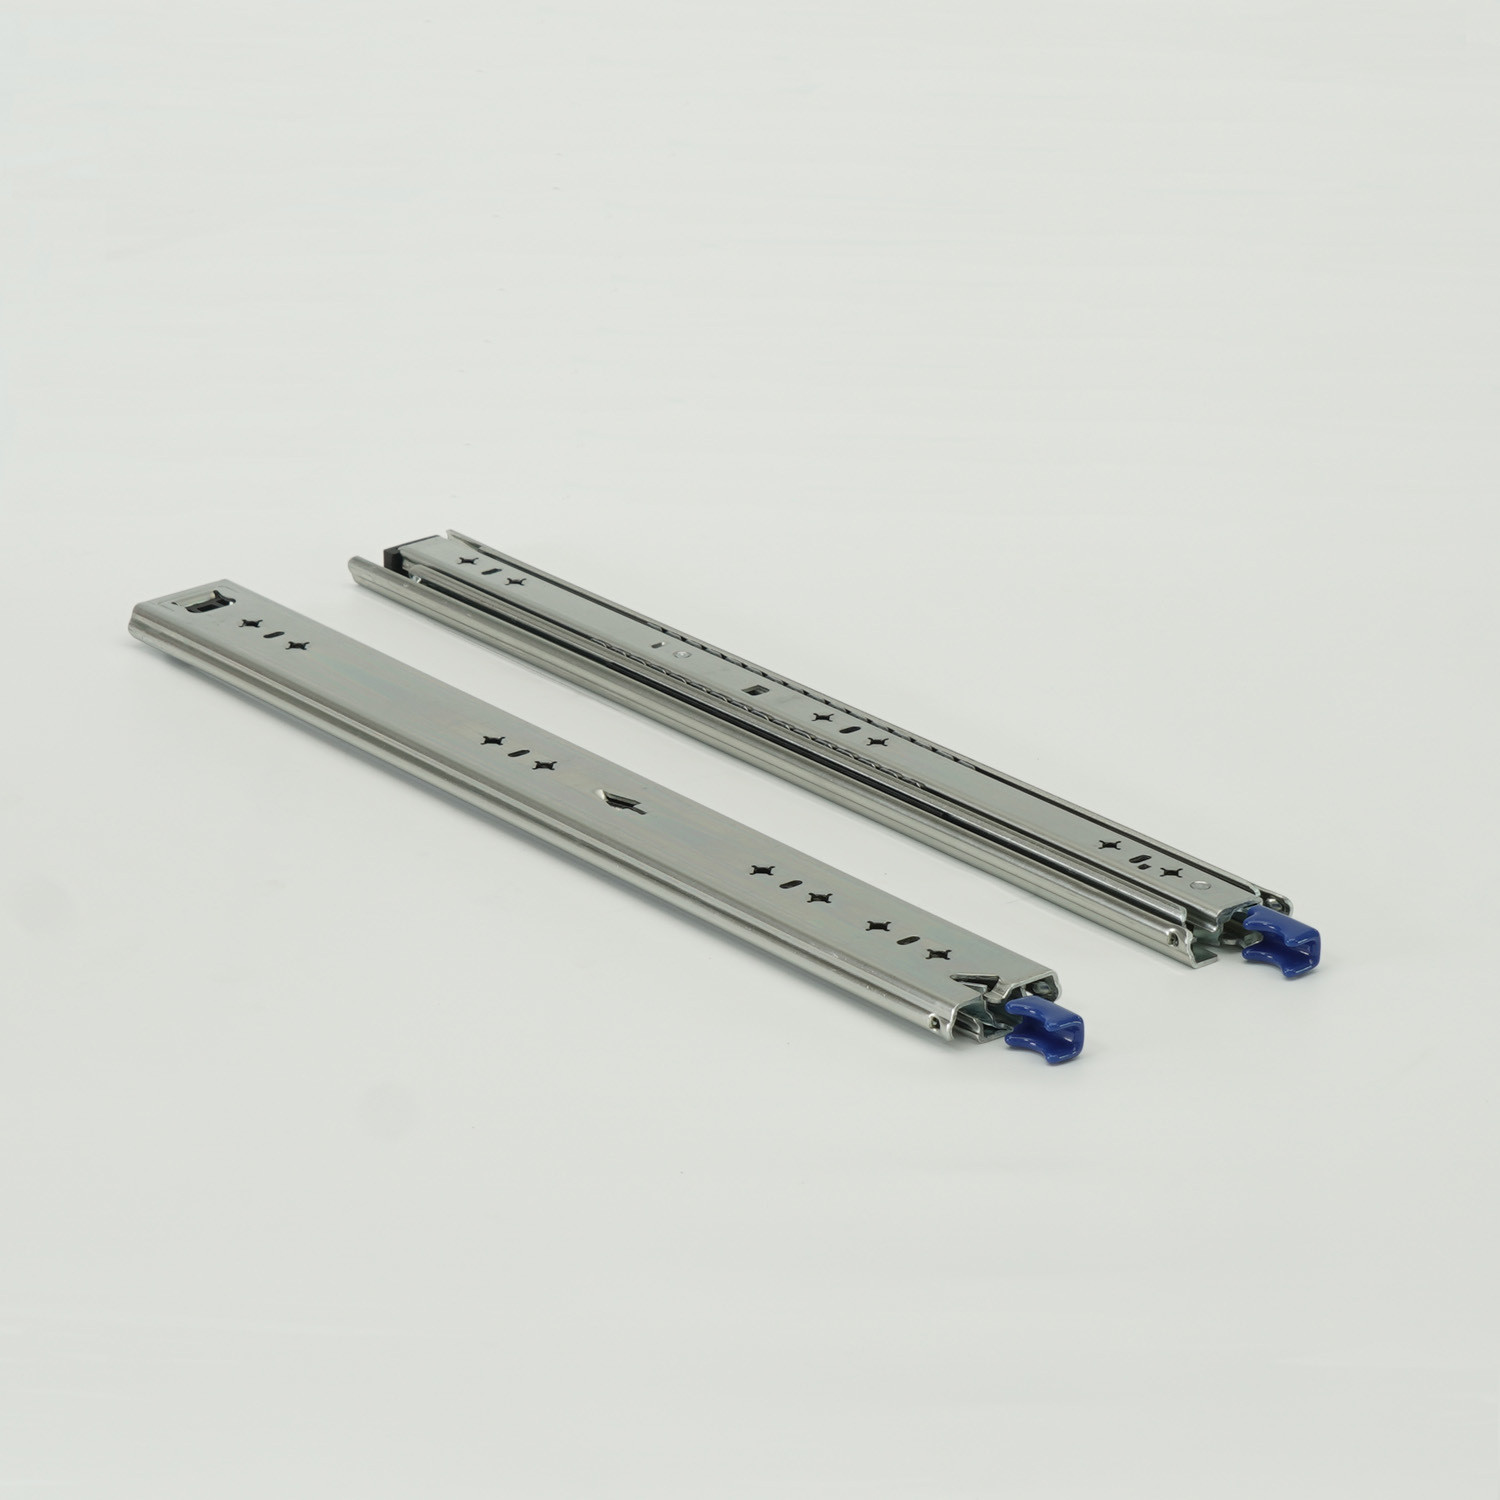 53mm 125kgs Precise Heavy Duty Drawer Slide with Lock Function